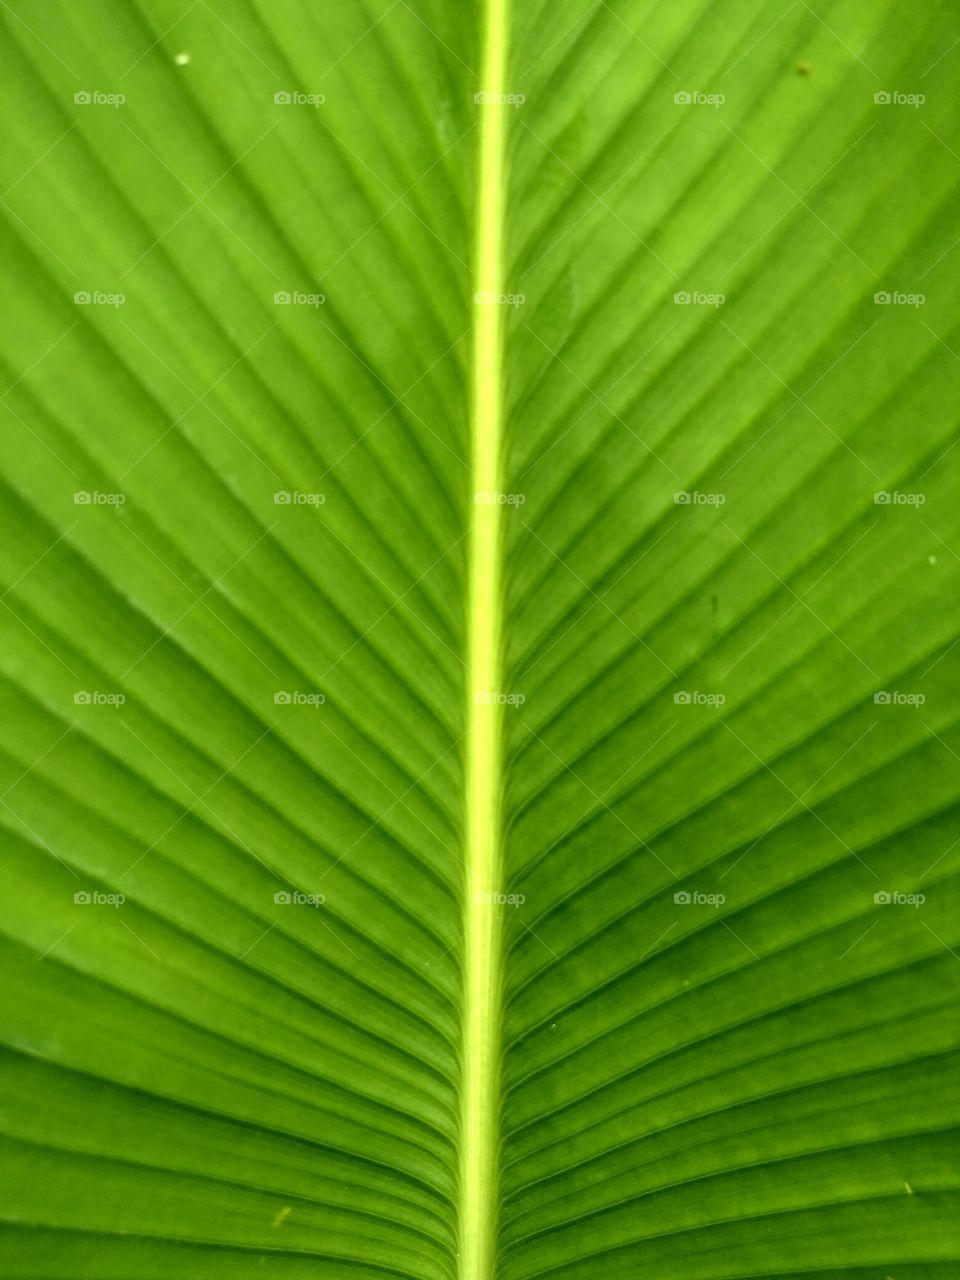 Texture photograpy of leaf